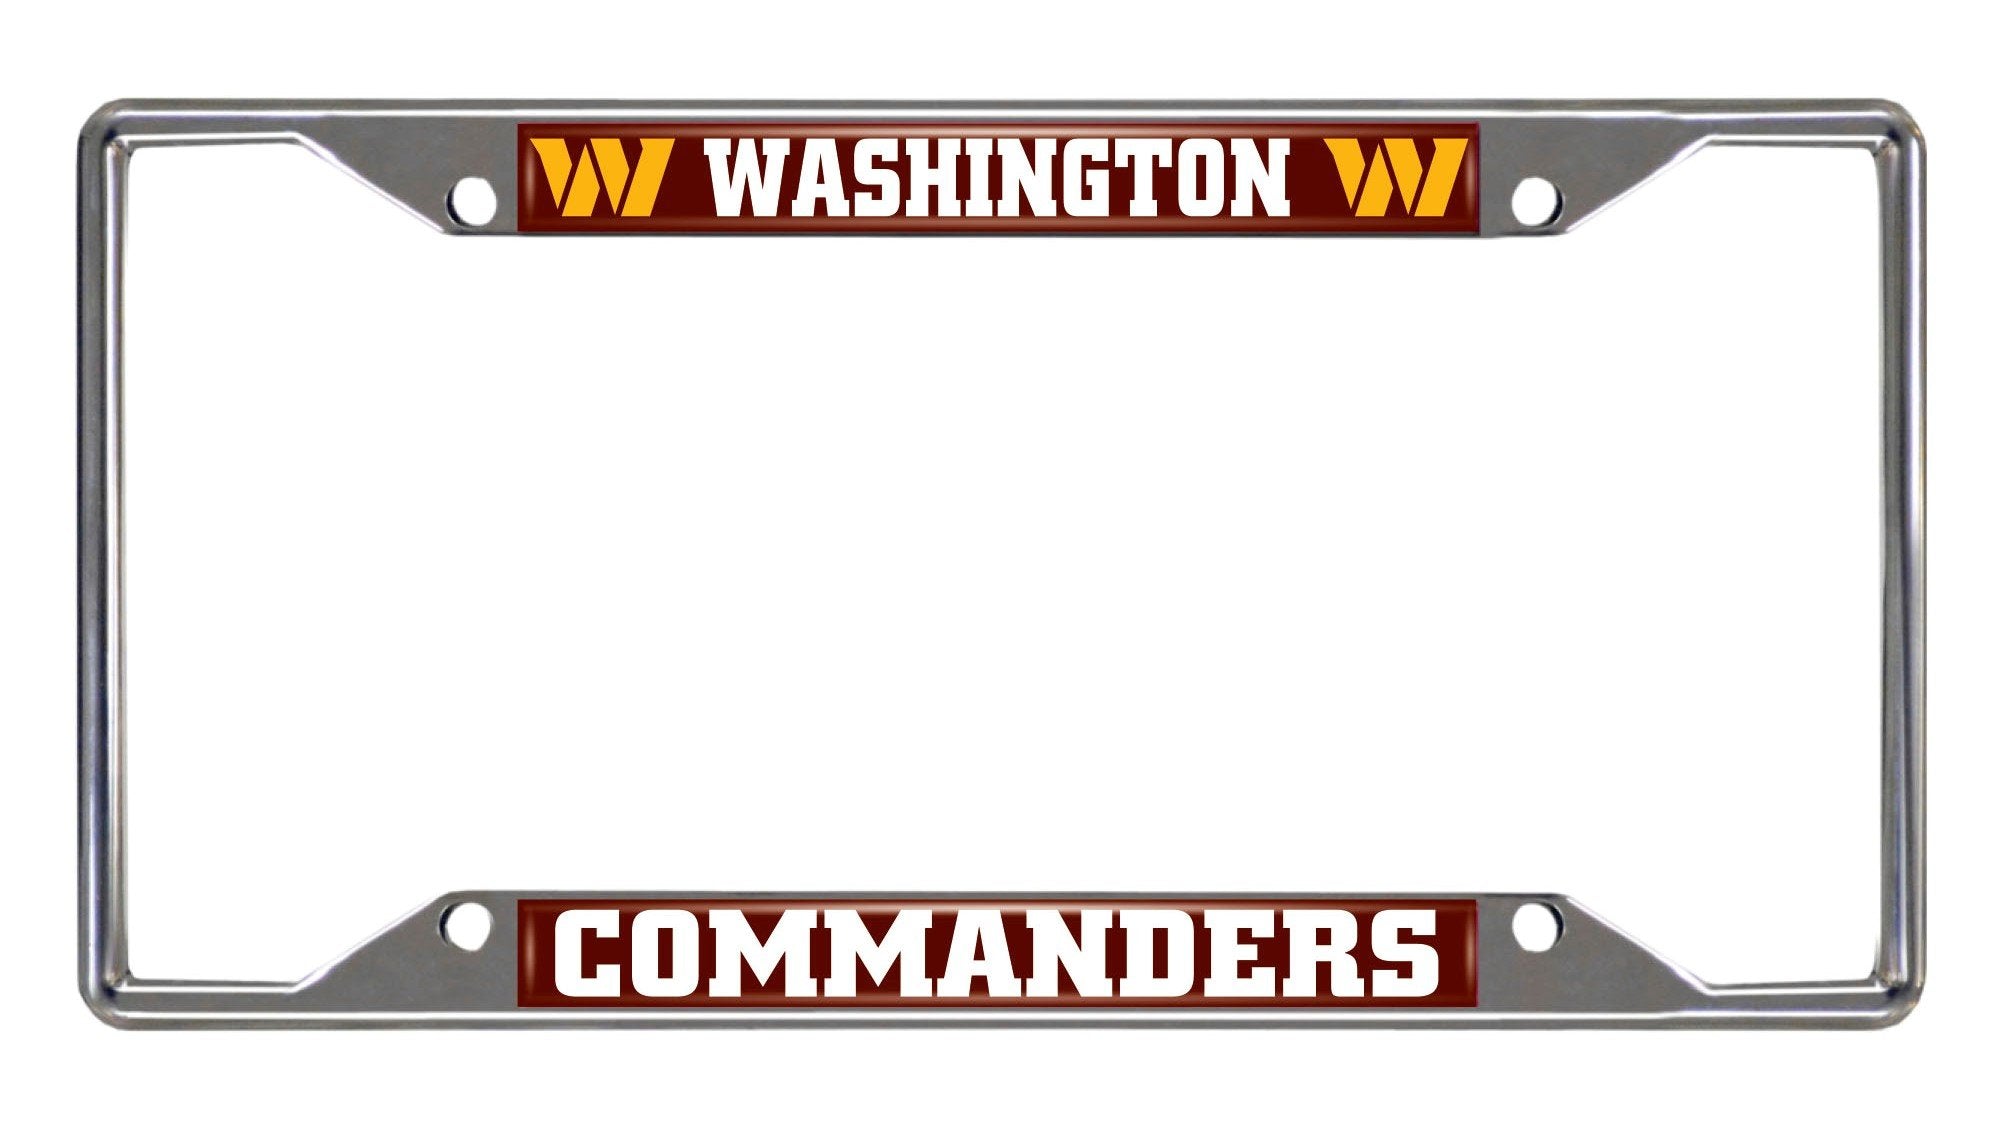 Washington Commanders Metal License Plate Frame Tag Cover 12x6 Inch